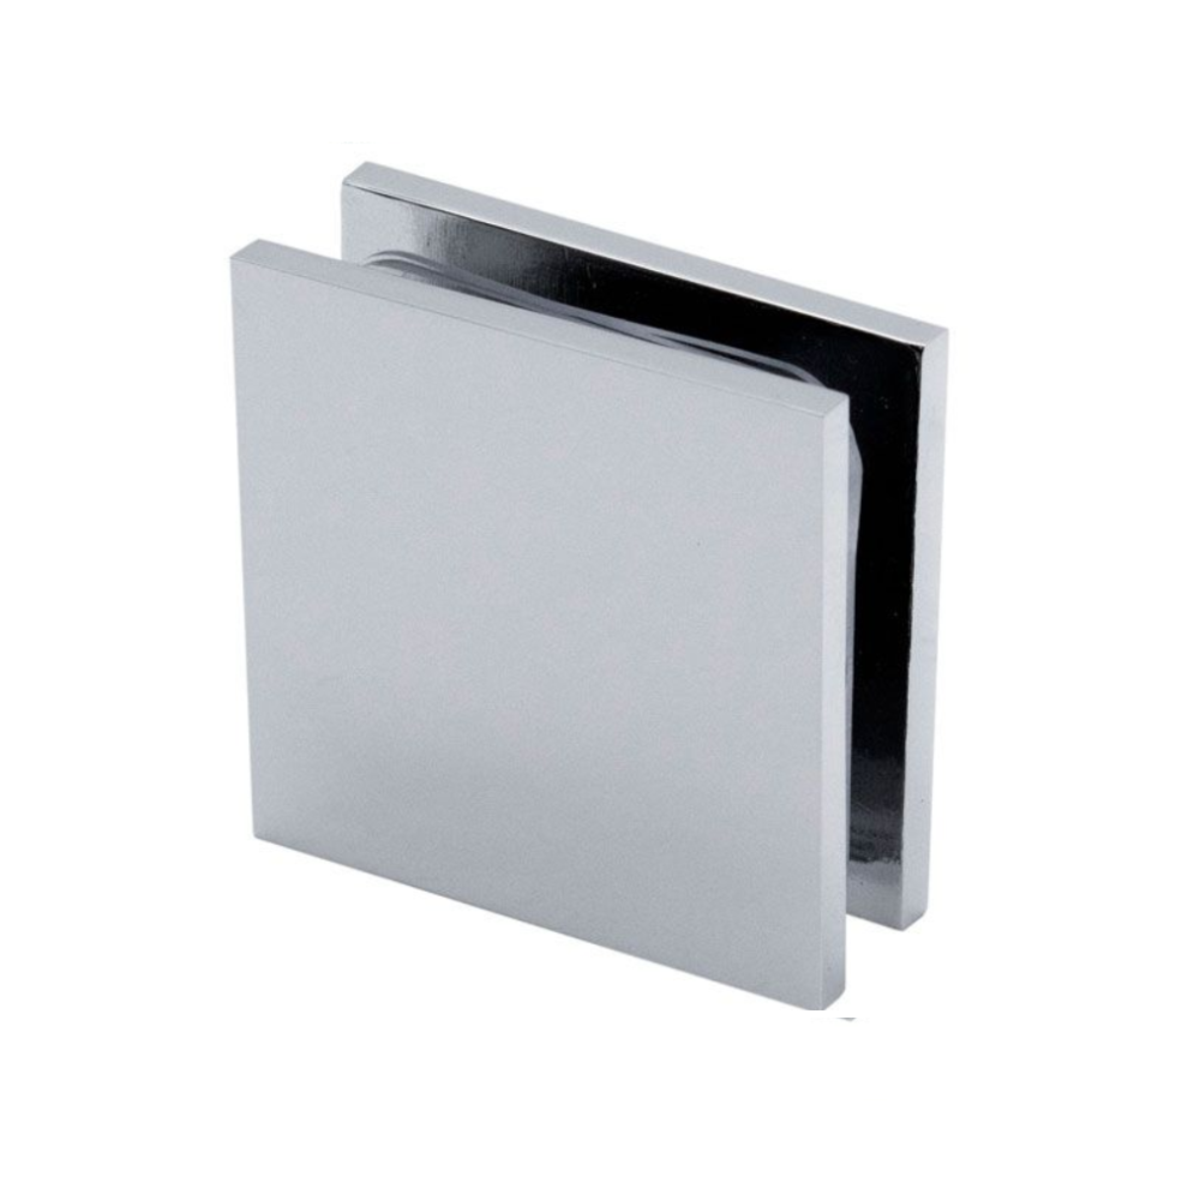 1 3/4" x 1 3/4" Wall Mount Square Edges Glass Clamp